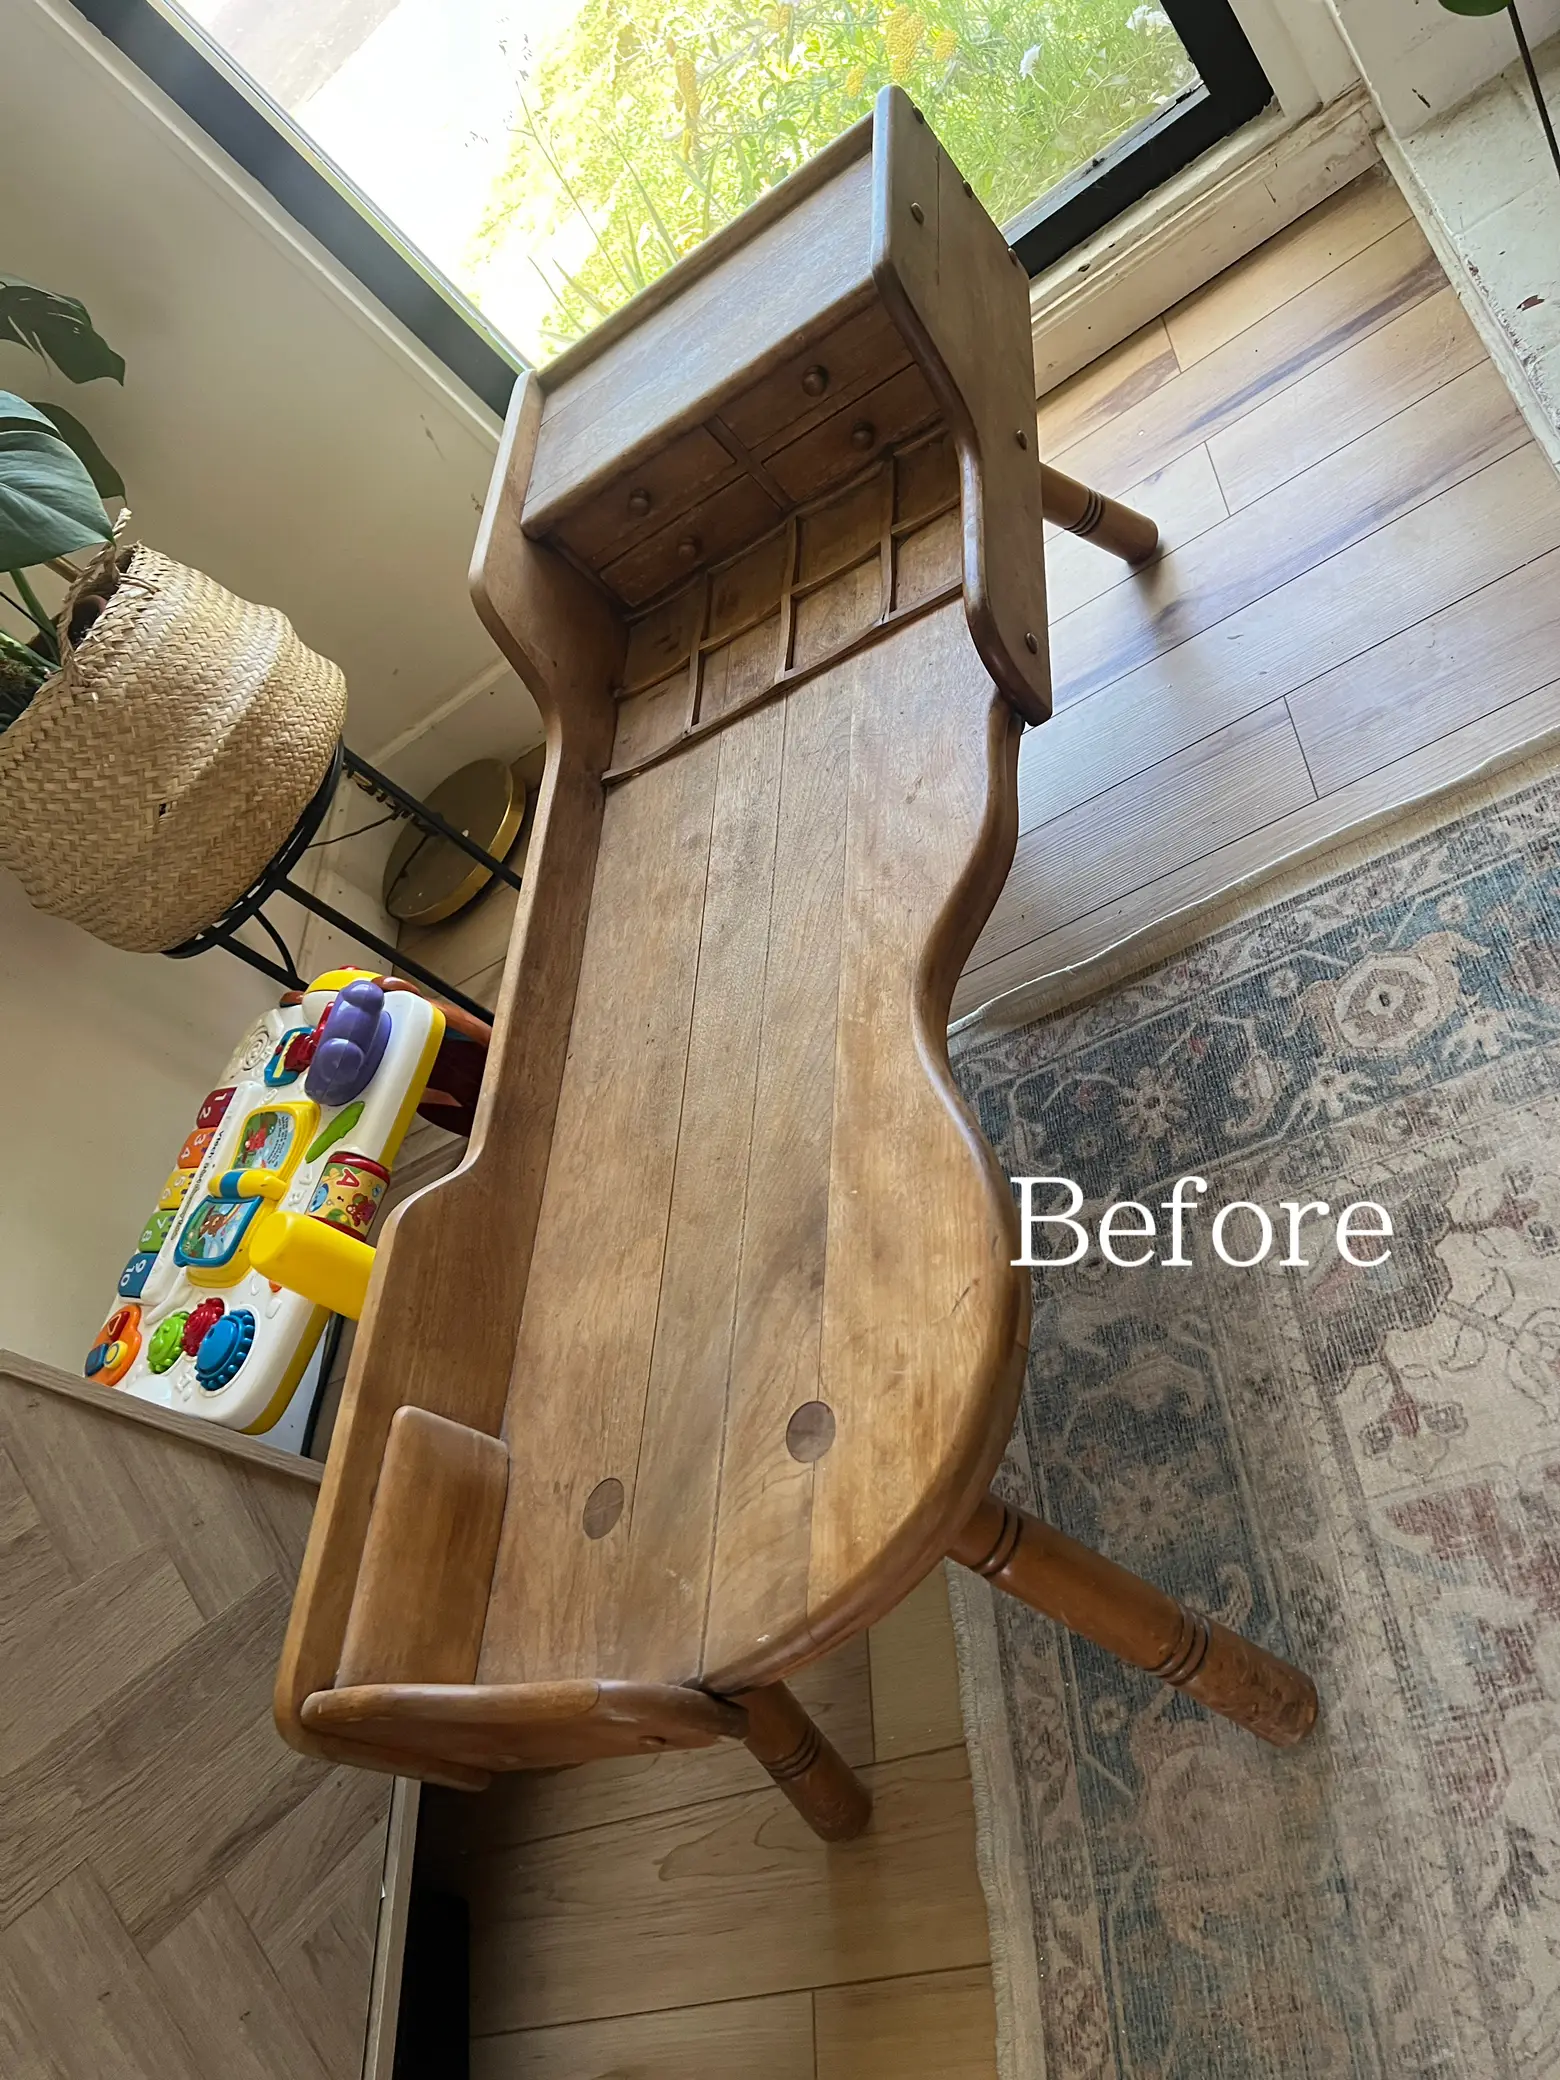 Products for easy DIY furniture restoration